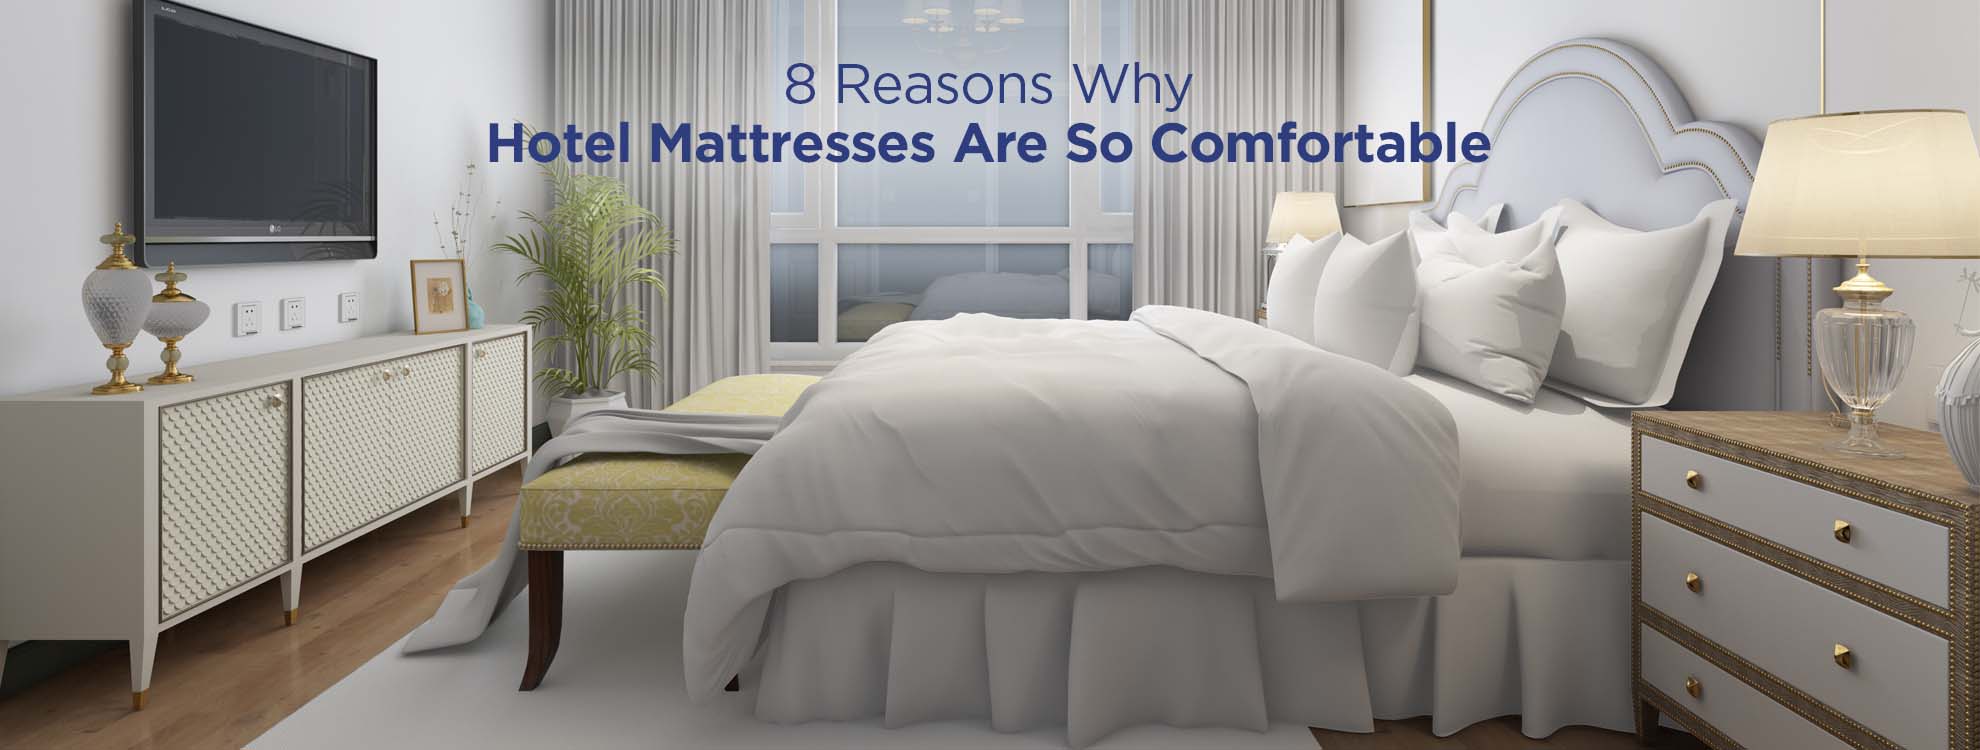 Reasons Why Hotel Mattresses Are So Comfortable